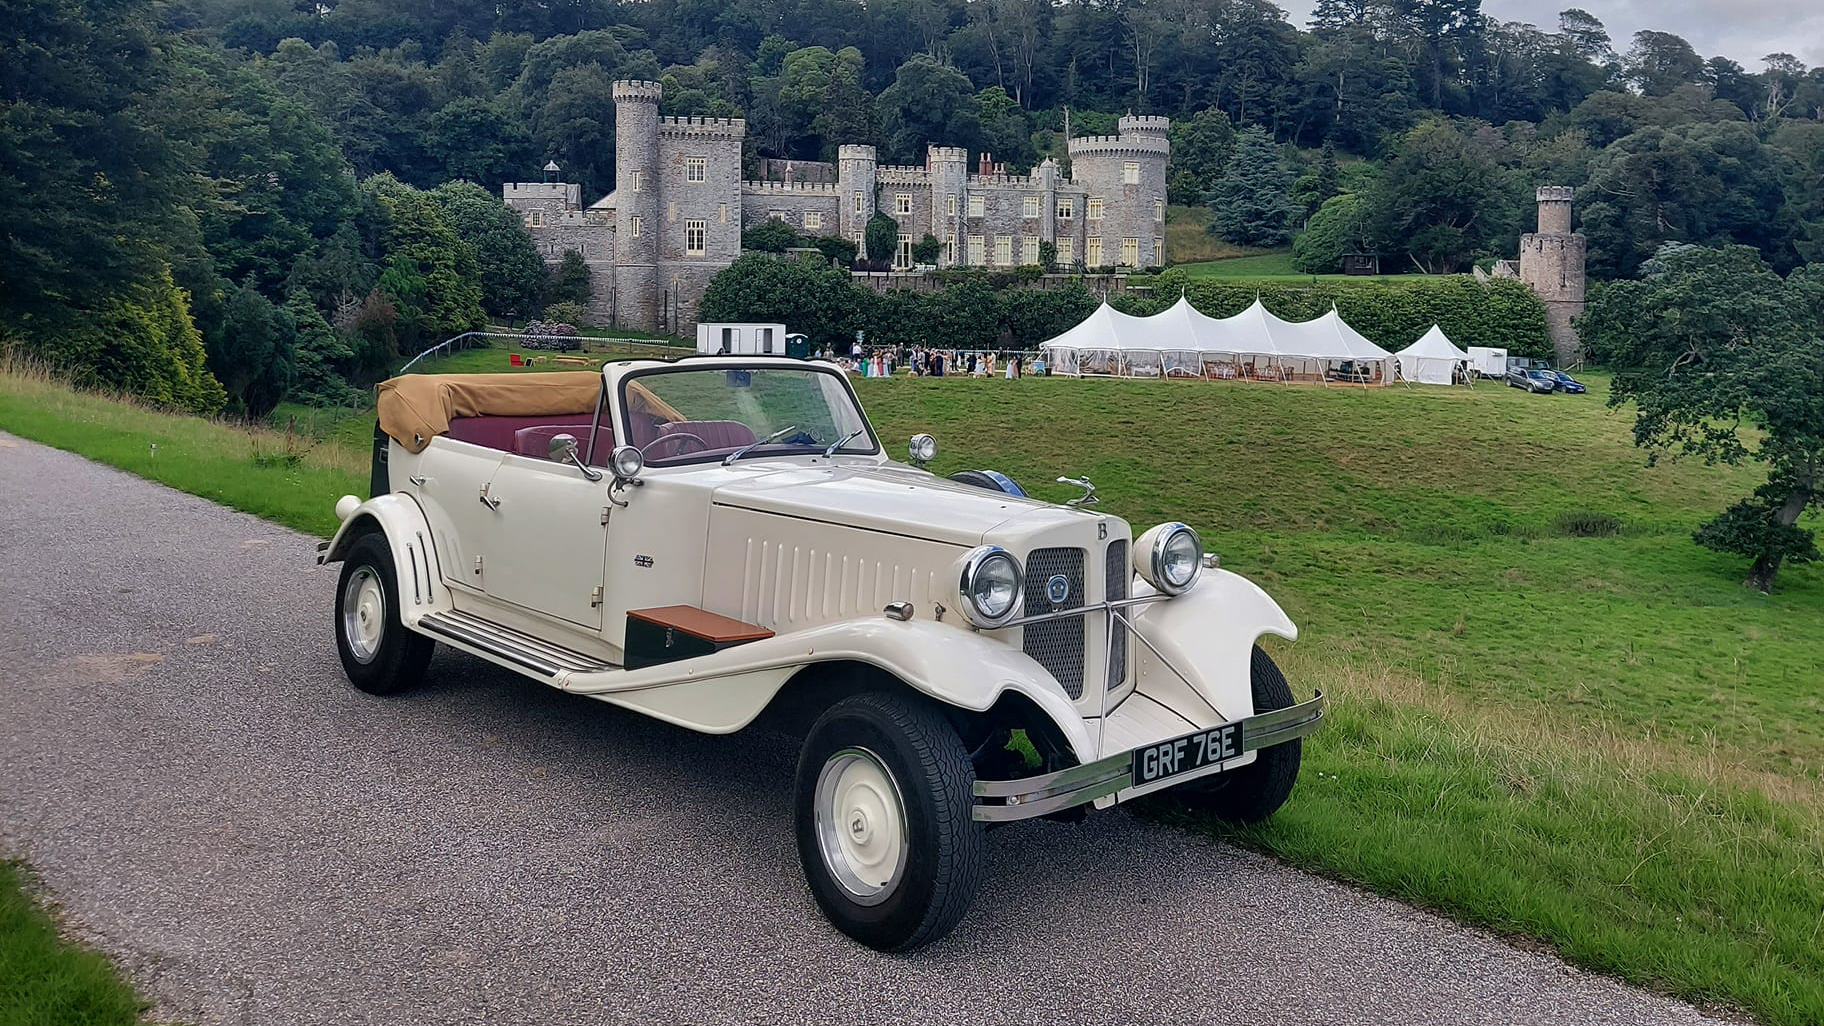 Beauford 4 Door Convertible with roof down and wedding castle in the background